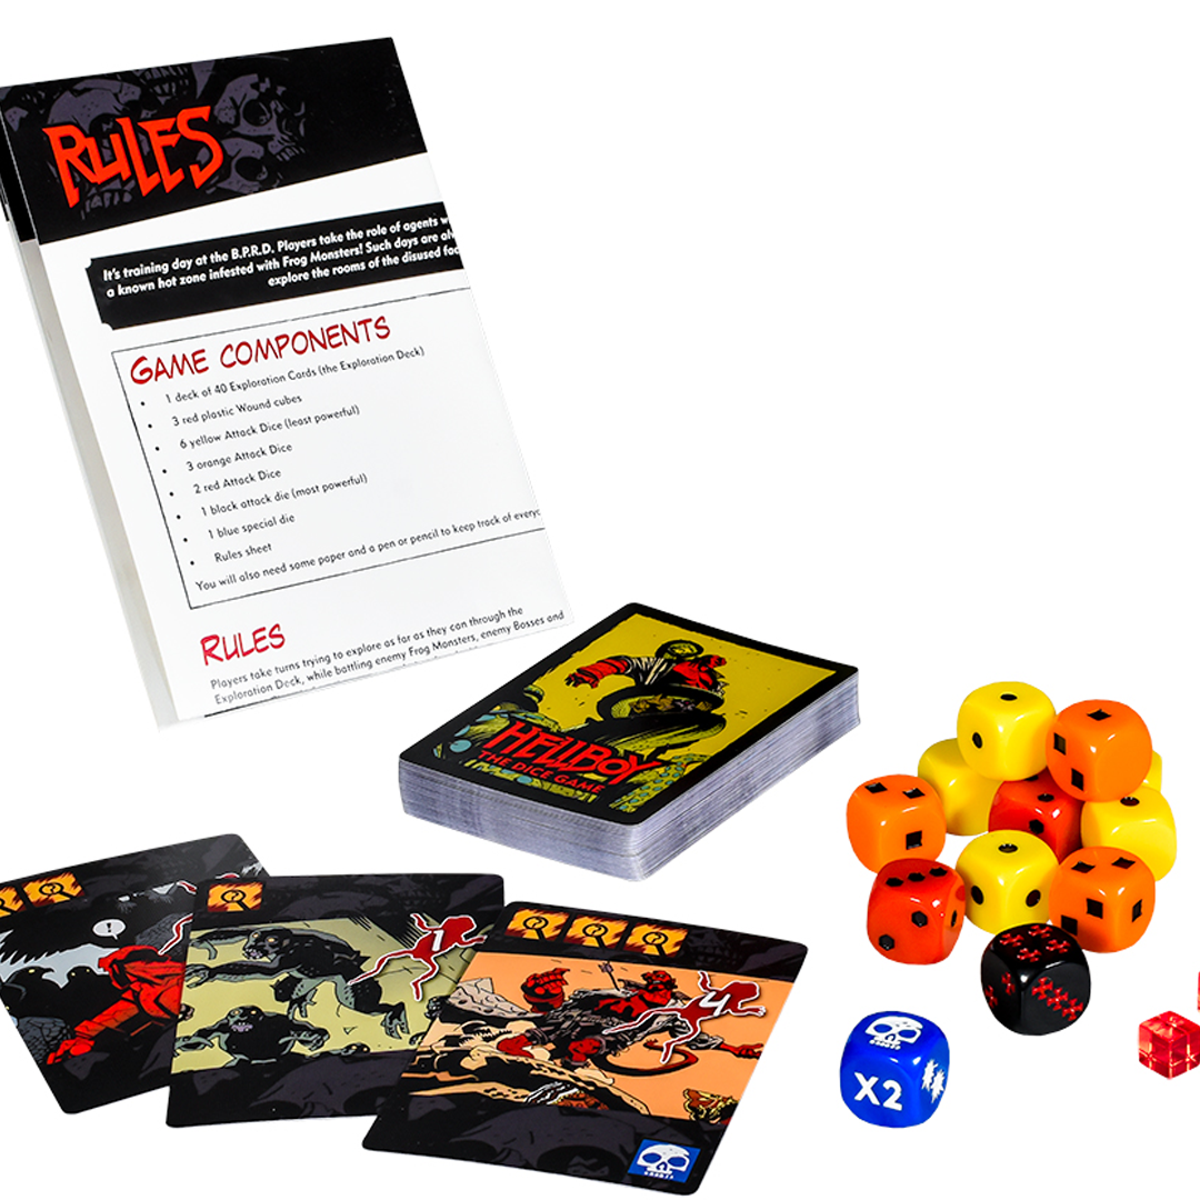 Hellboy: The Dice Game is a fast-paced exploration title about fighting  frog monsters